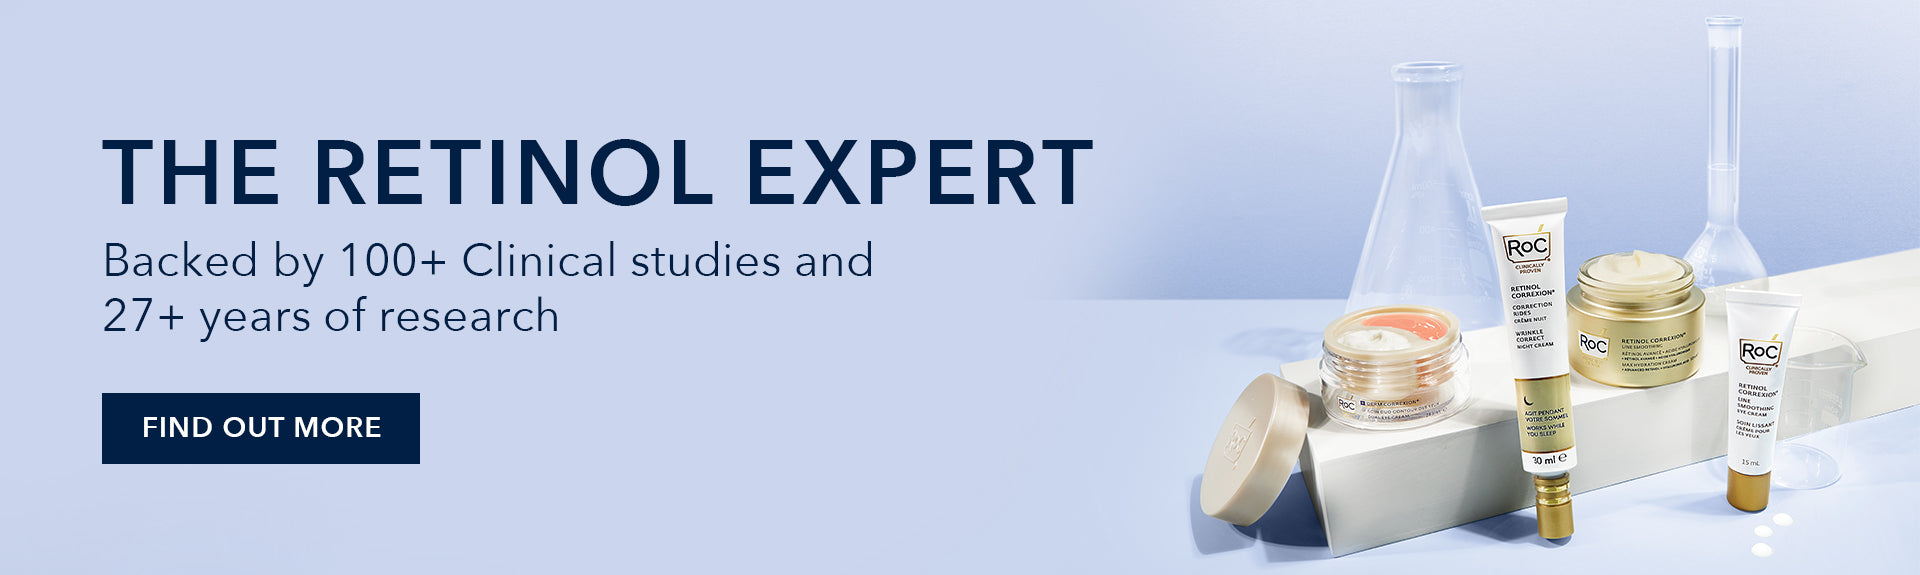 The Retinol Expert. Backed by 100+ clinical studies and 27+ years of research. Find out more. 